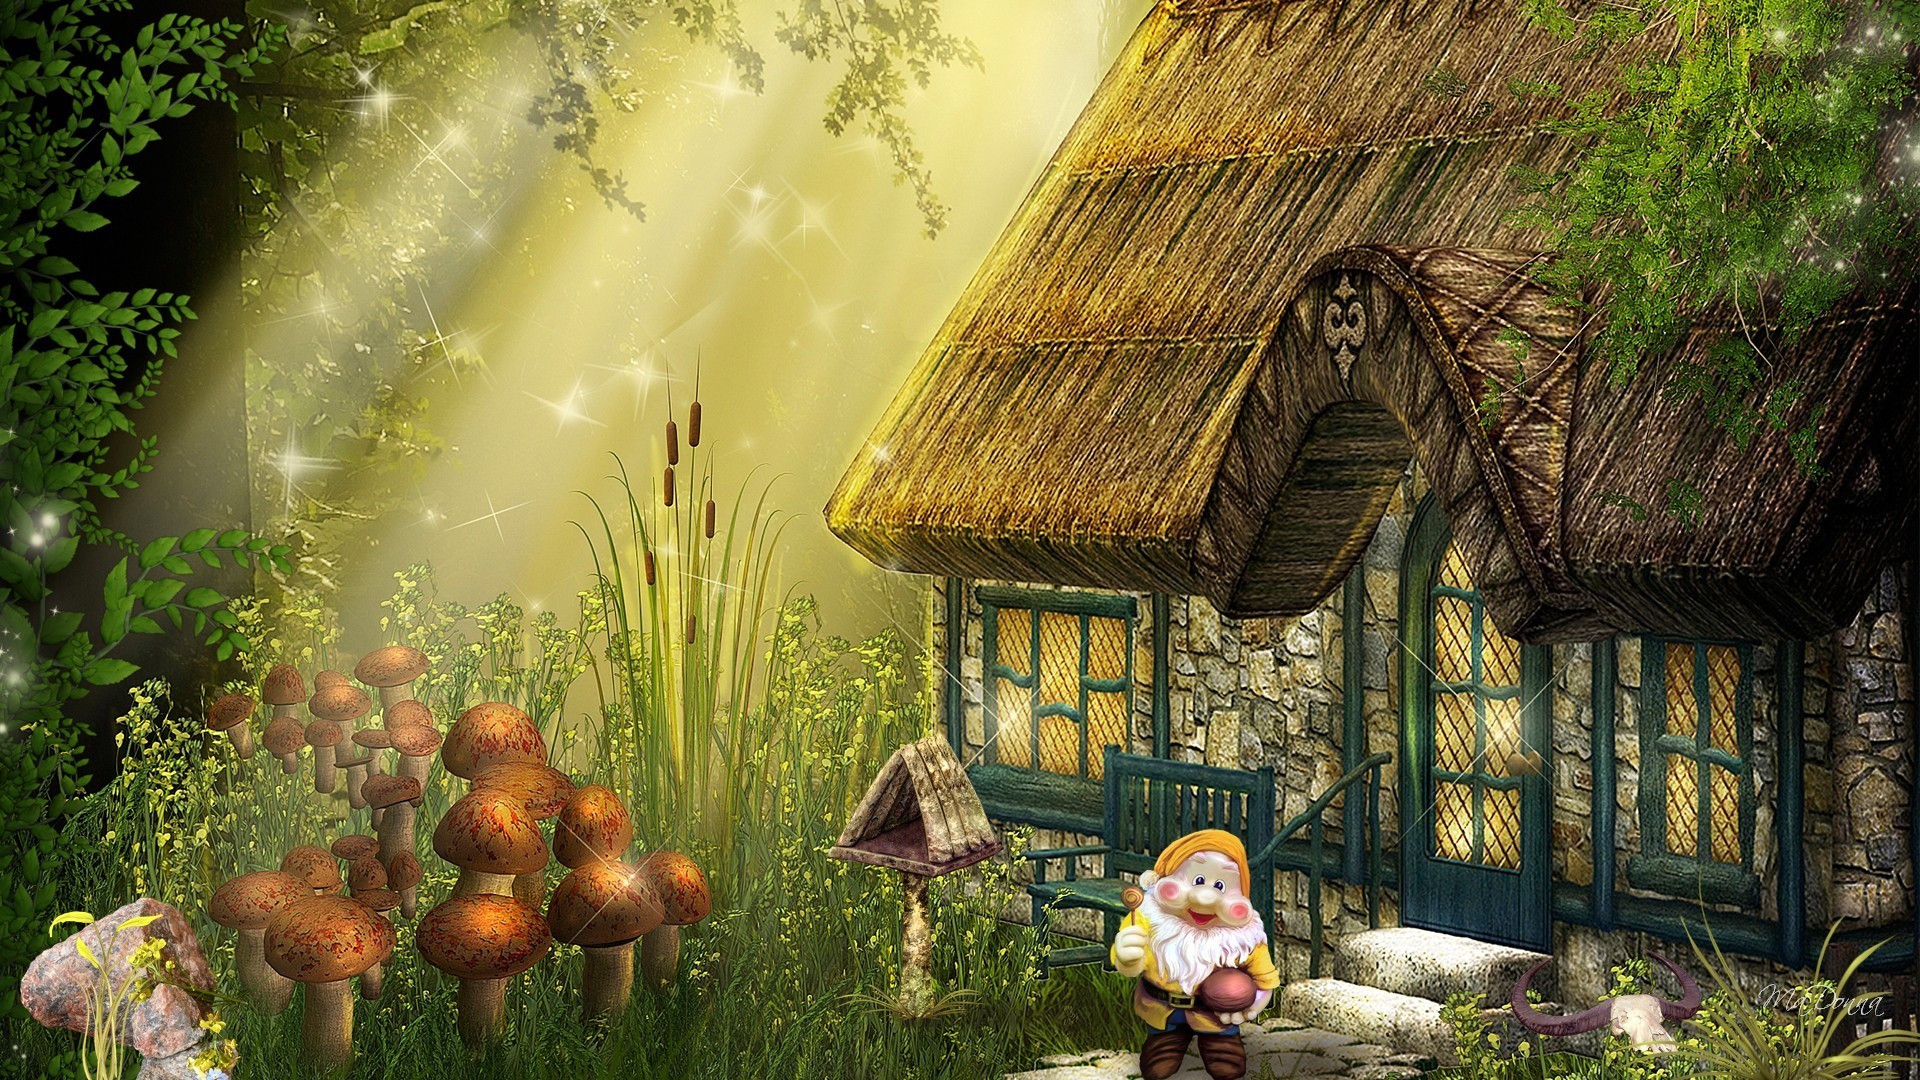 1920x1080 Tale Tag - Gnomes Secret House Woods Firefox Persona Grass Cat Tails  Mushrooms Trees Toadstools Fantasy